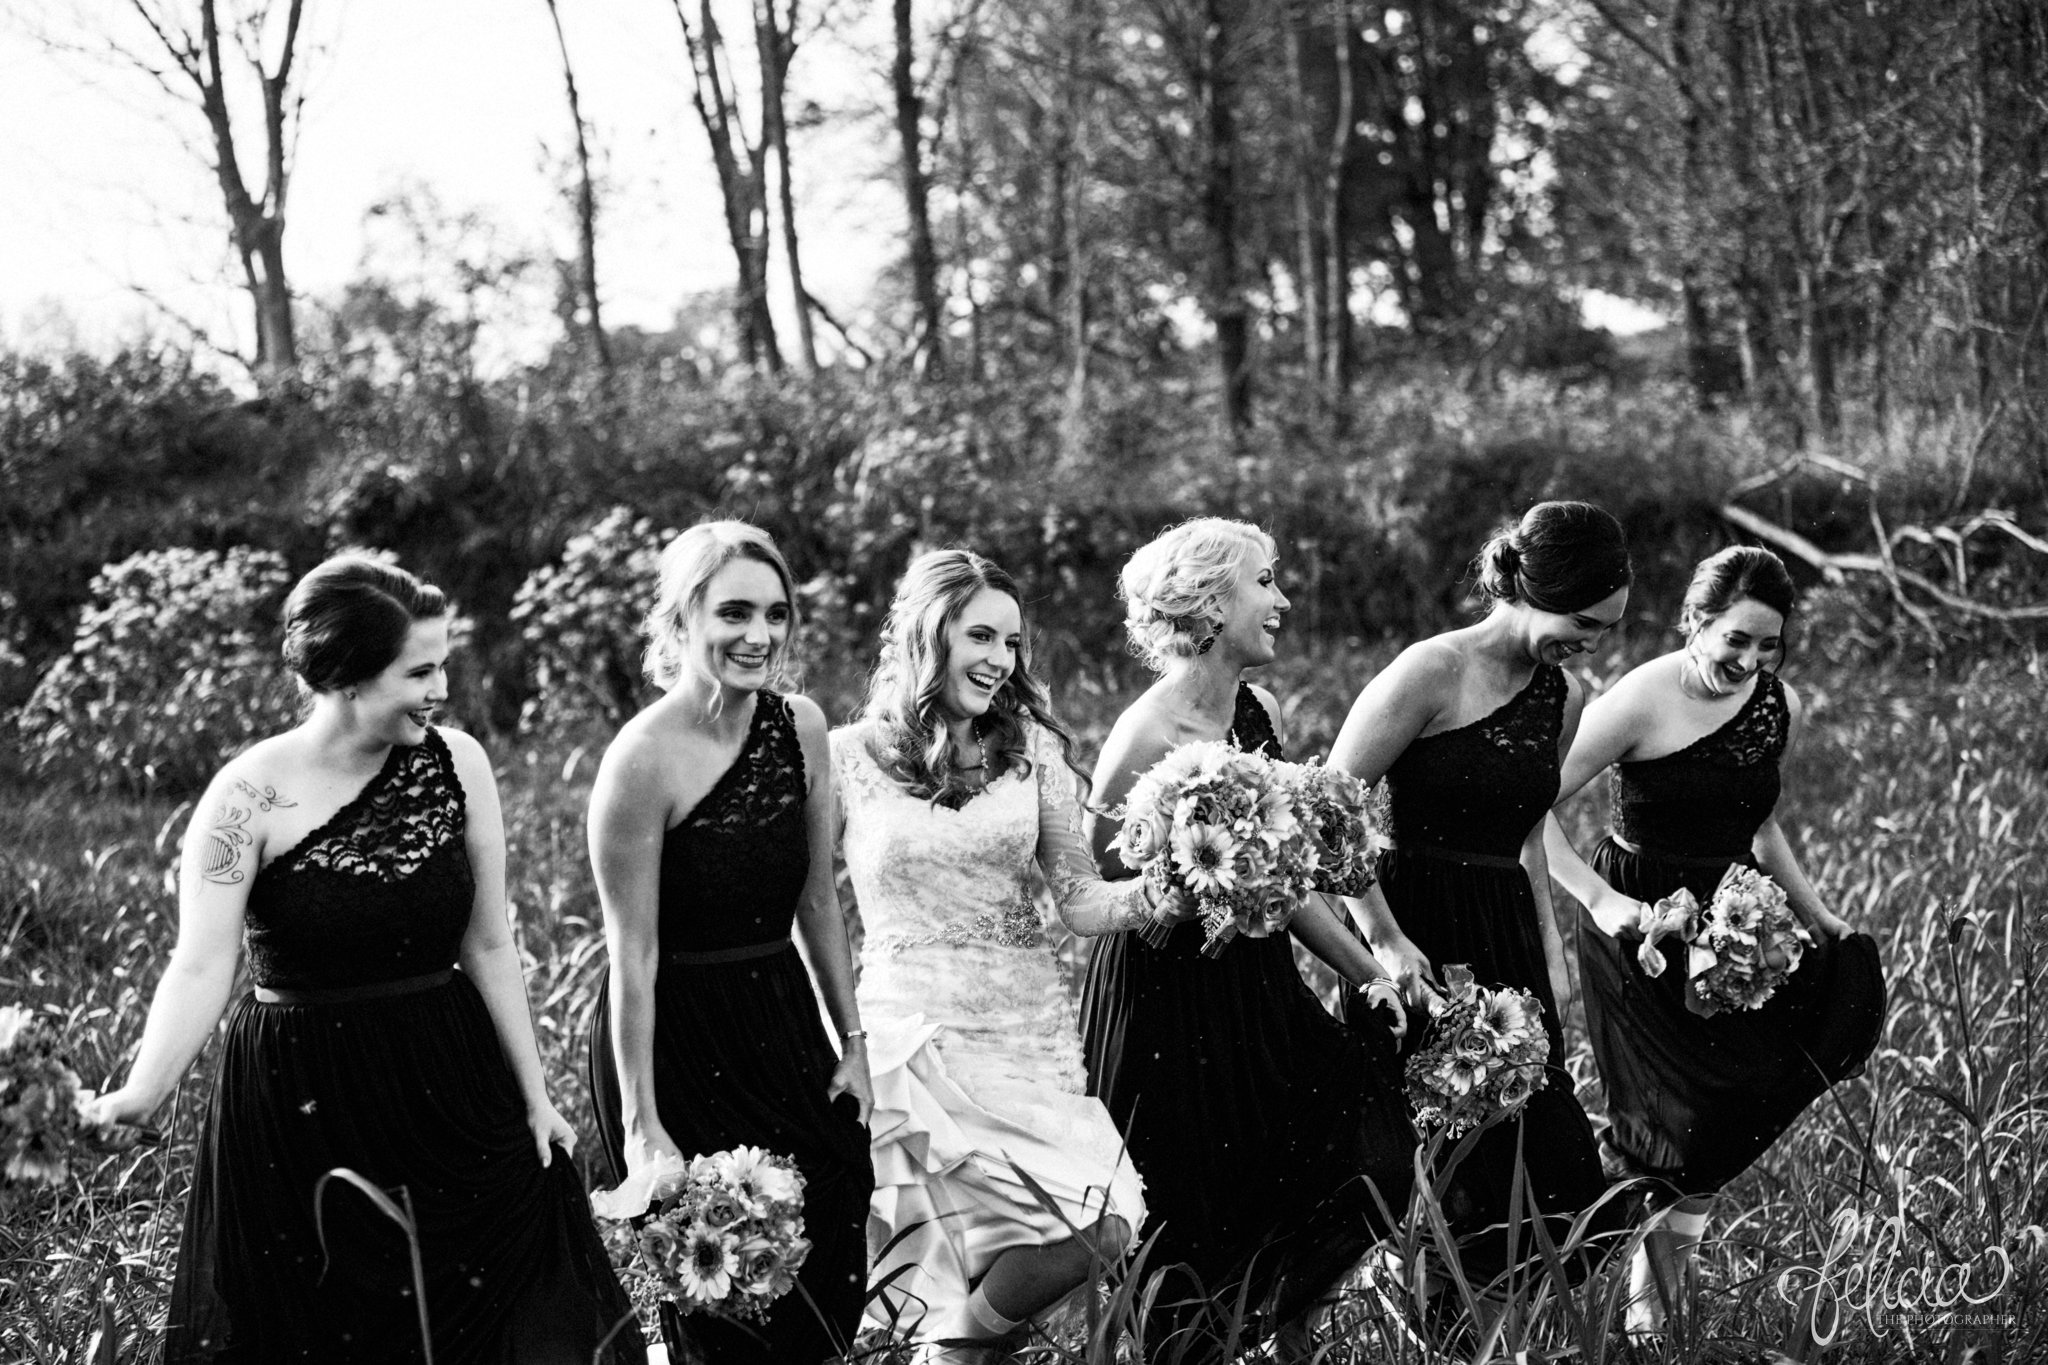 black and white | weddings | wedding photos | wedding photography | images by feliciathephotographer.com | St. Therese Catholic Church | Kansas City | downtown | The Terrace on Grand | bridal party portraits | grassy field | field | nature | bridesmaid portraits | black bridesmaid dresses | bridesmaids with the bride | candid 